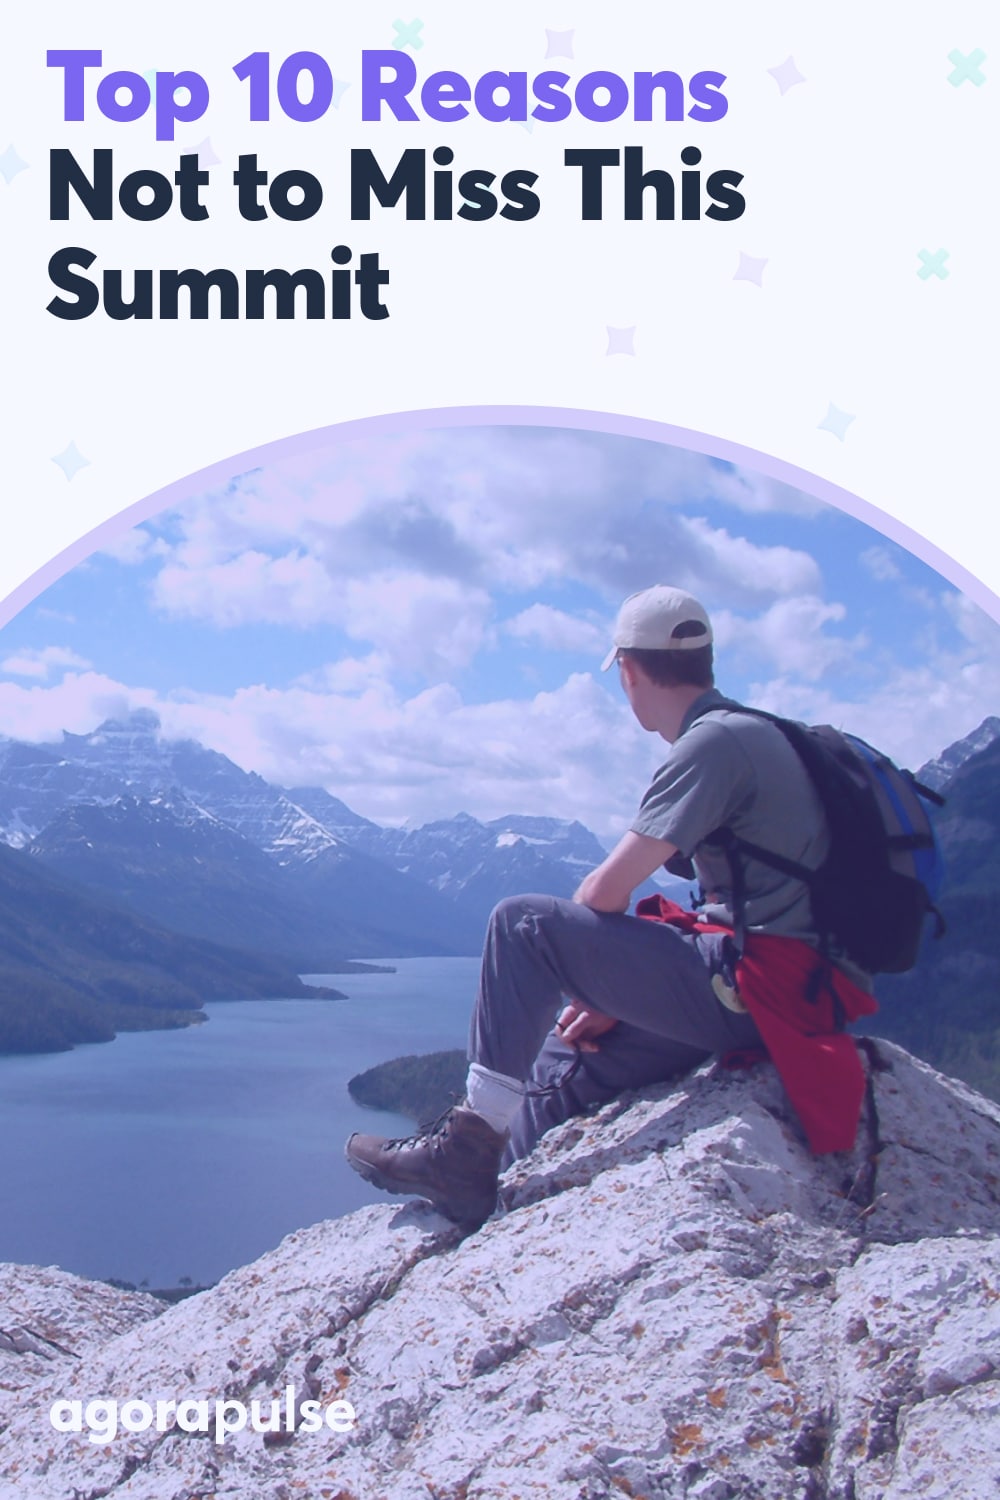 Top 10 Reasons Not to Miss This Summit